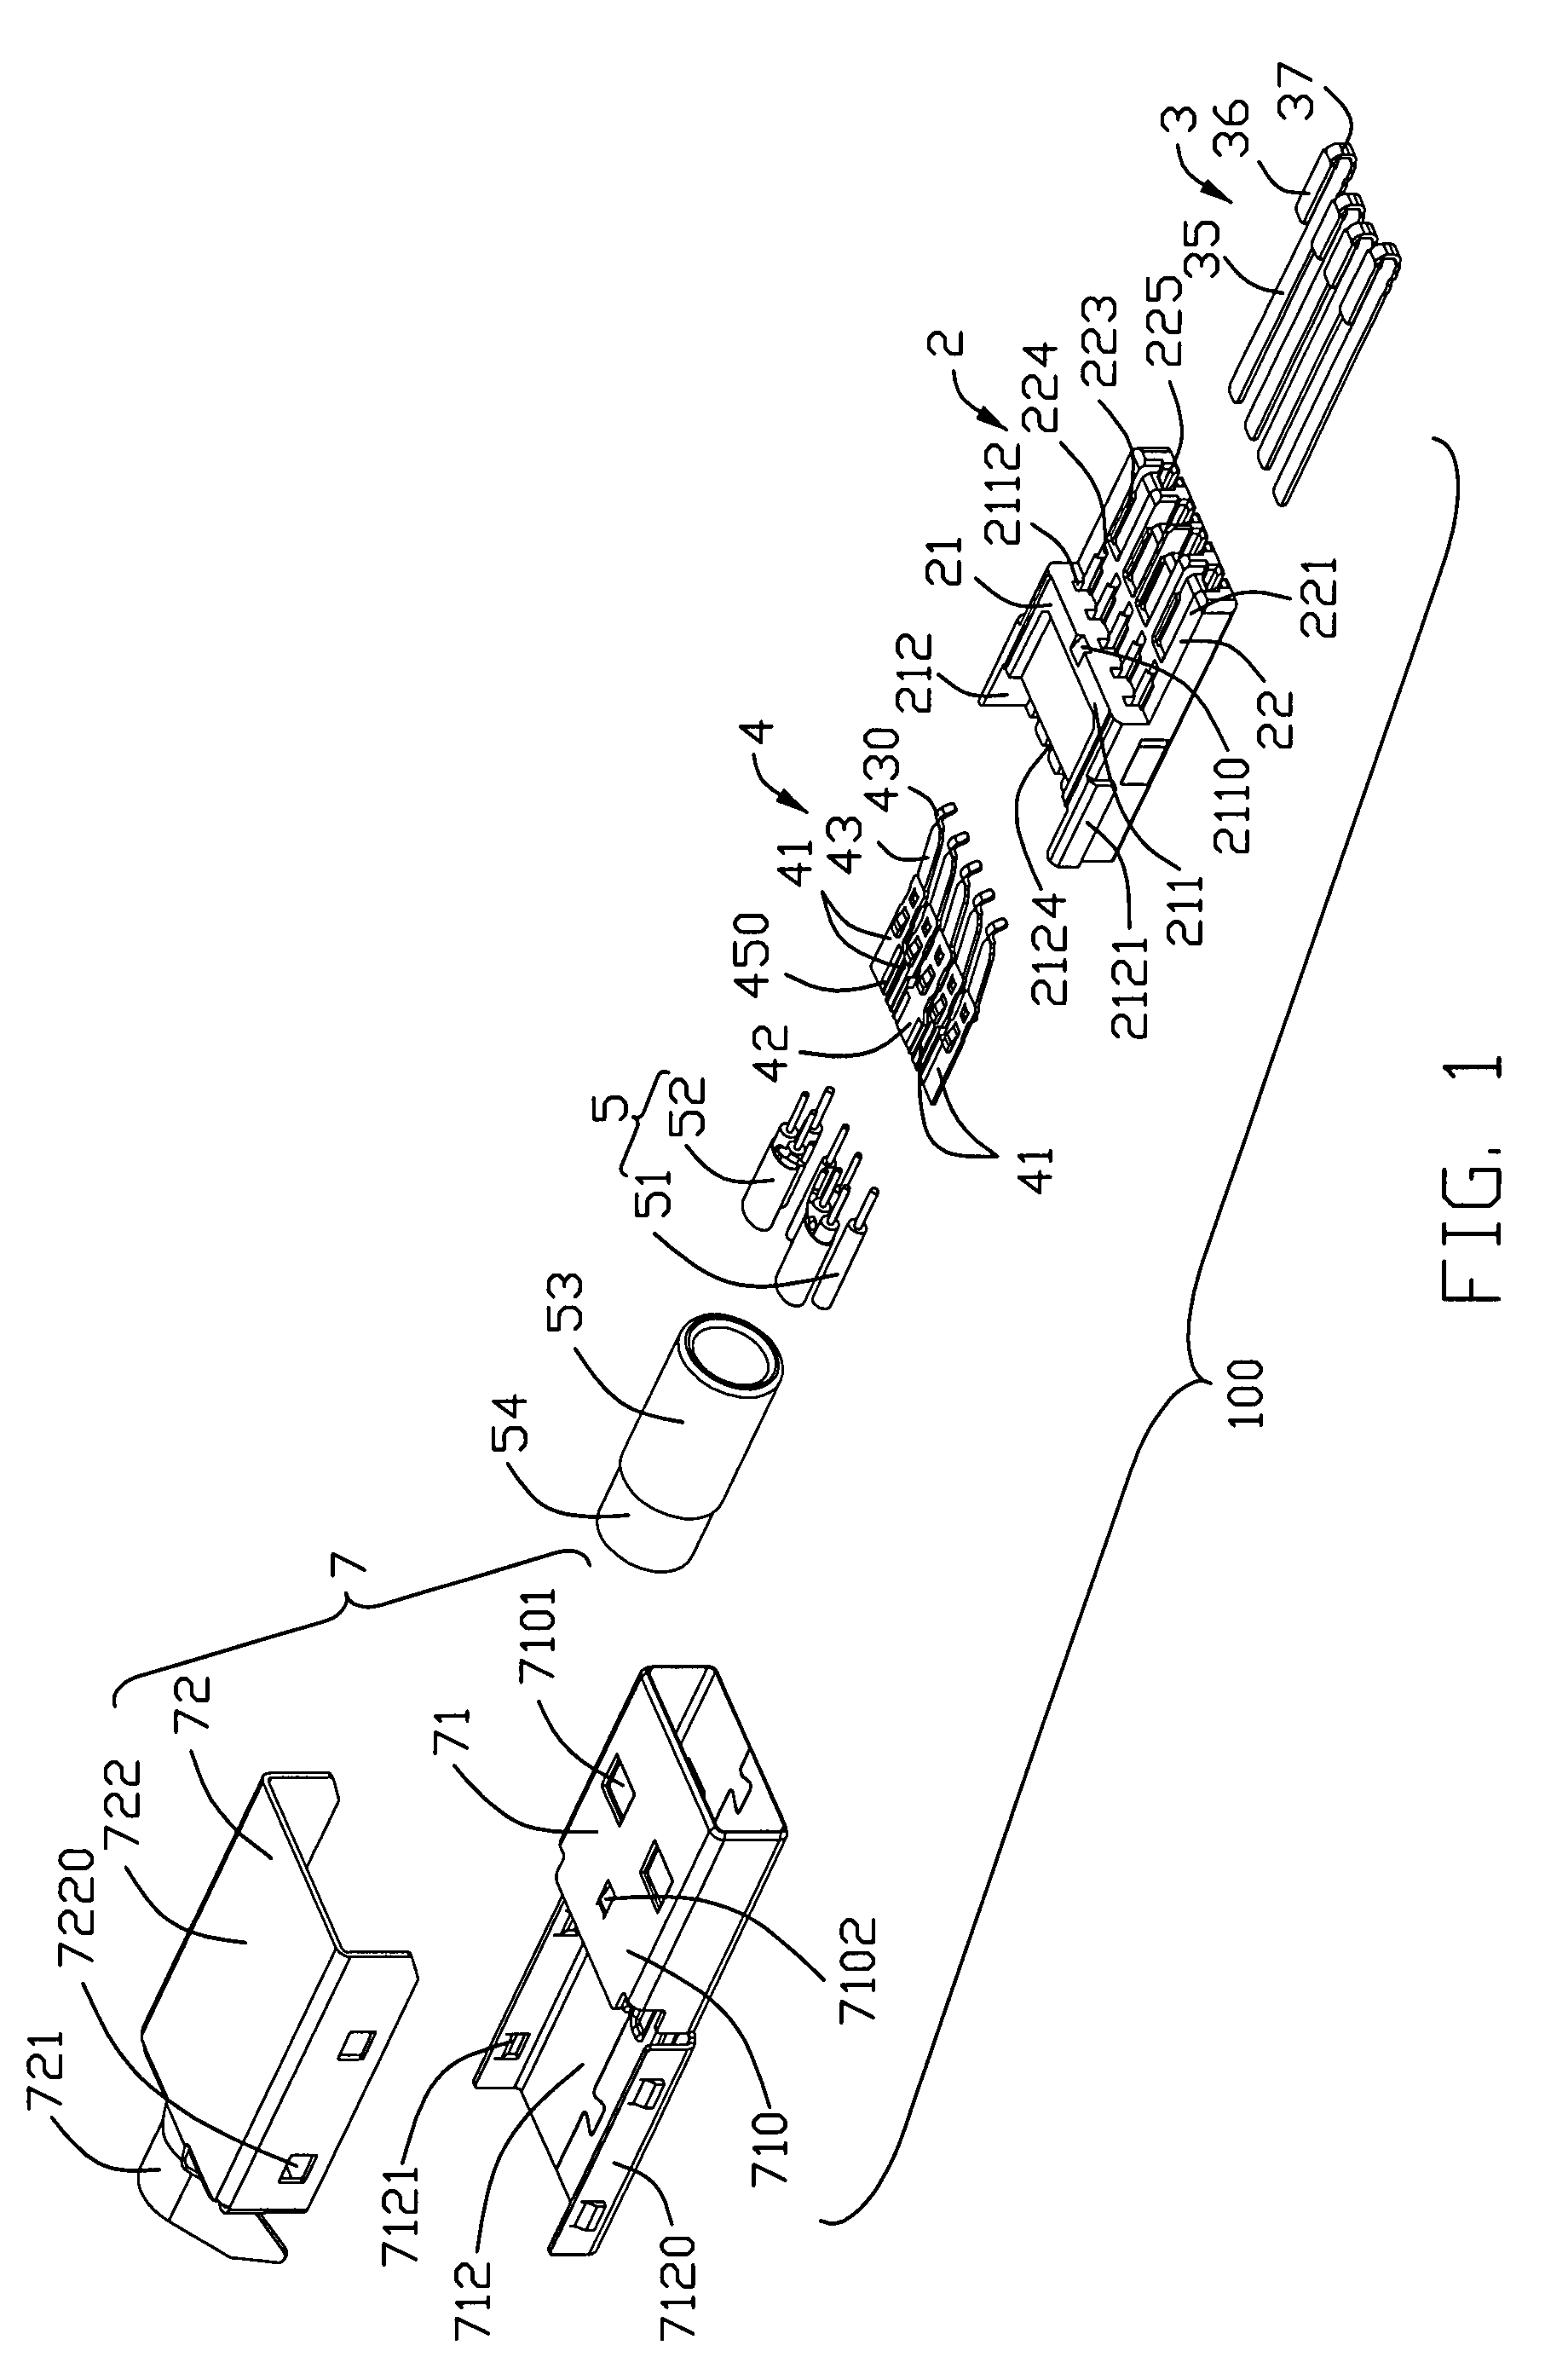 Electrical connector with improved wire termination arrangement